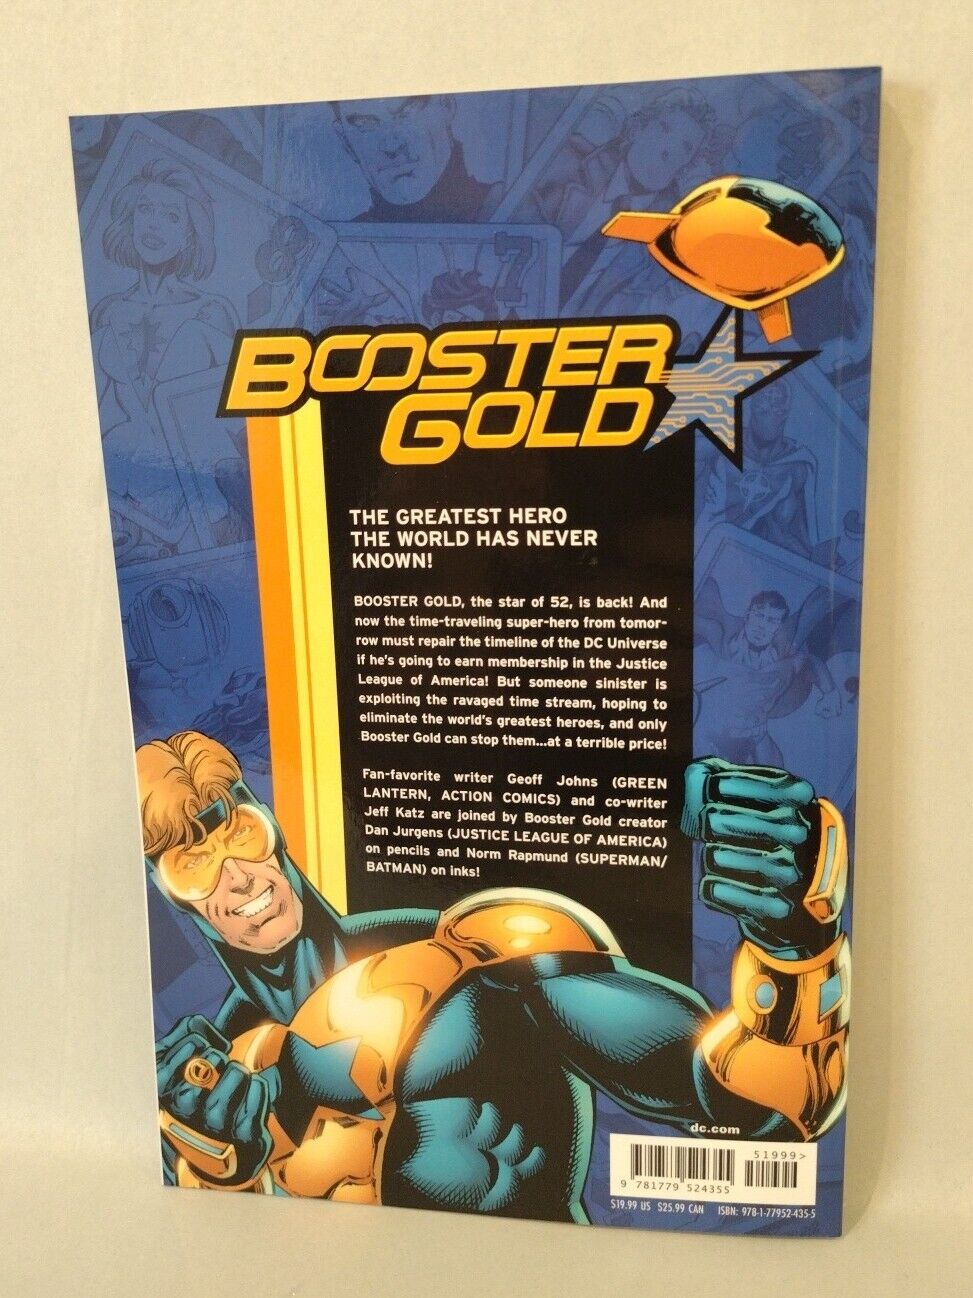 Booster Gold 52 Pick-Up (2023) DC Comics Softcover TPB Graphic Novel New